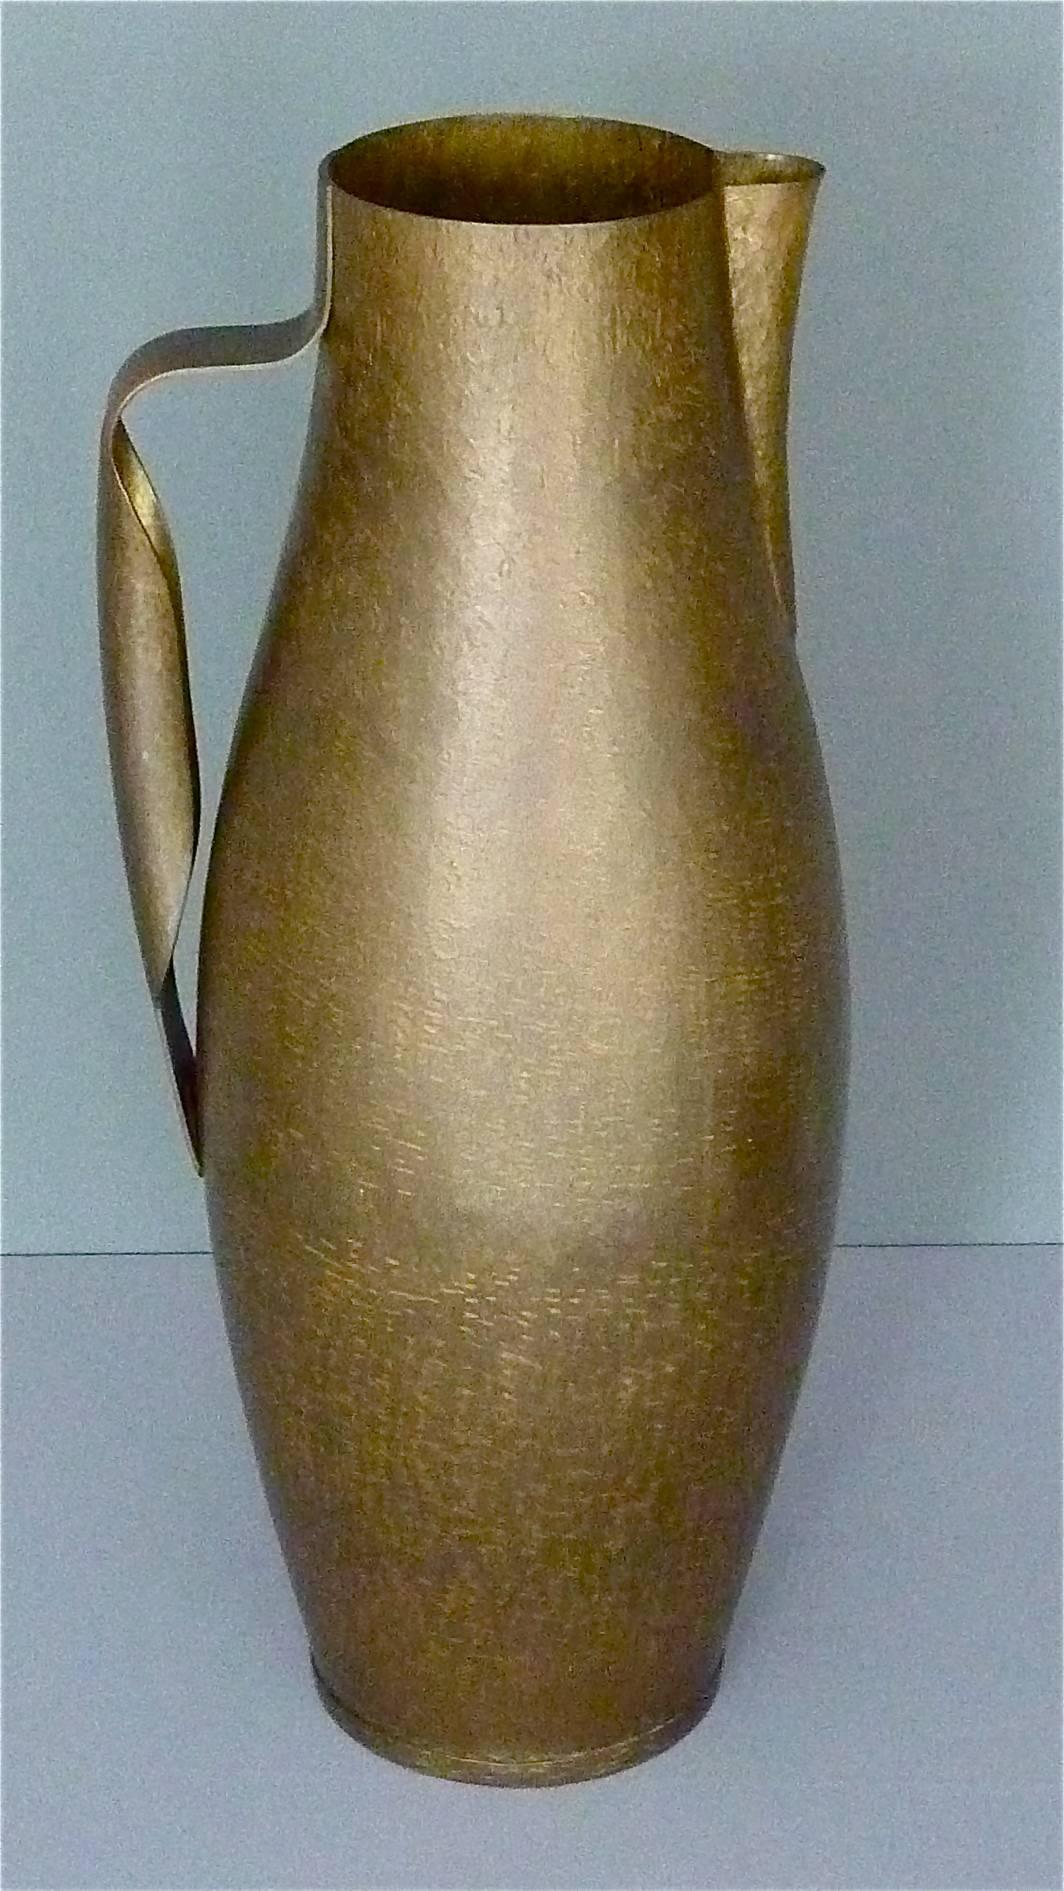 Huge and very rare pitcher with handle and a three-sided round bowl with stand designed by Hayno Focken around 1932 and executed by the Kunstgewerbeschule Burg Giebichenstein, Halle an der Saale in Germany. The pitcher which is 68,5 cm / 26.97